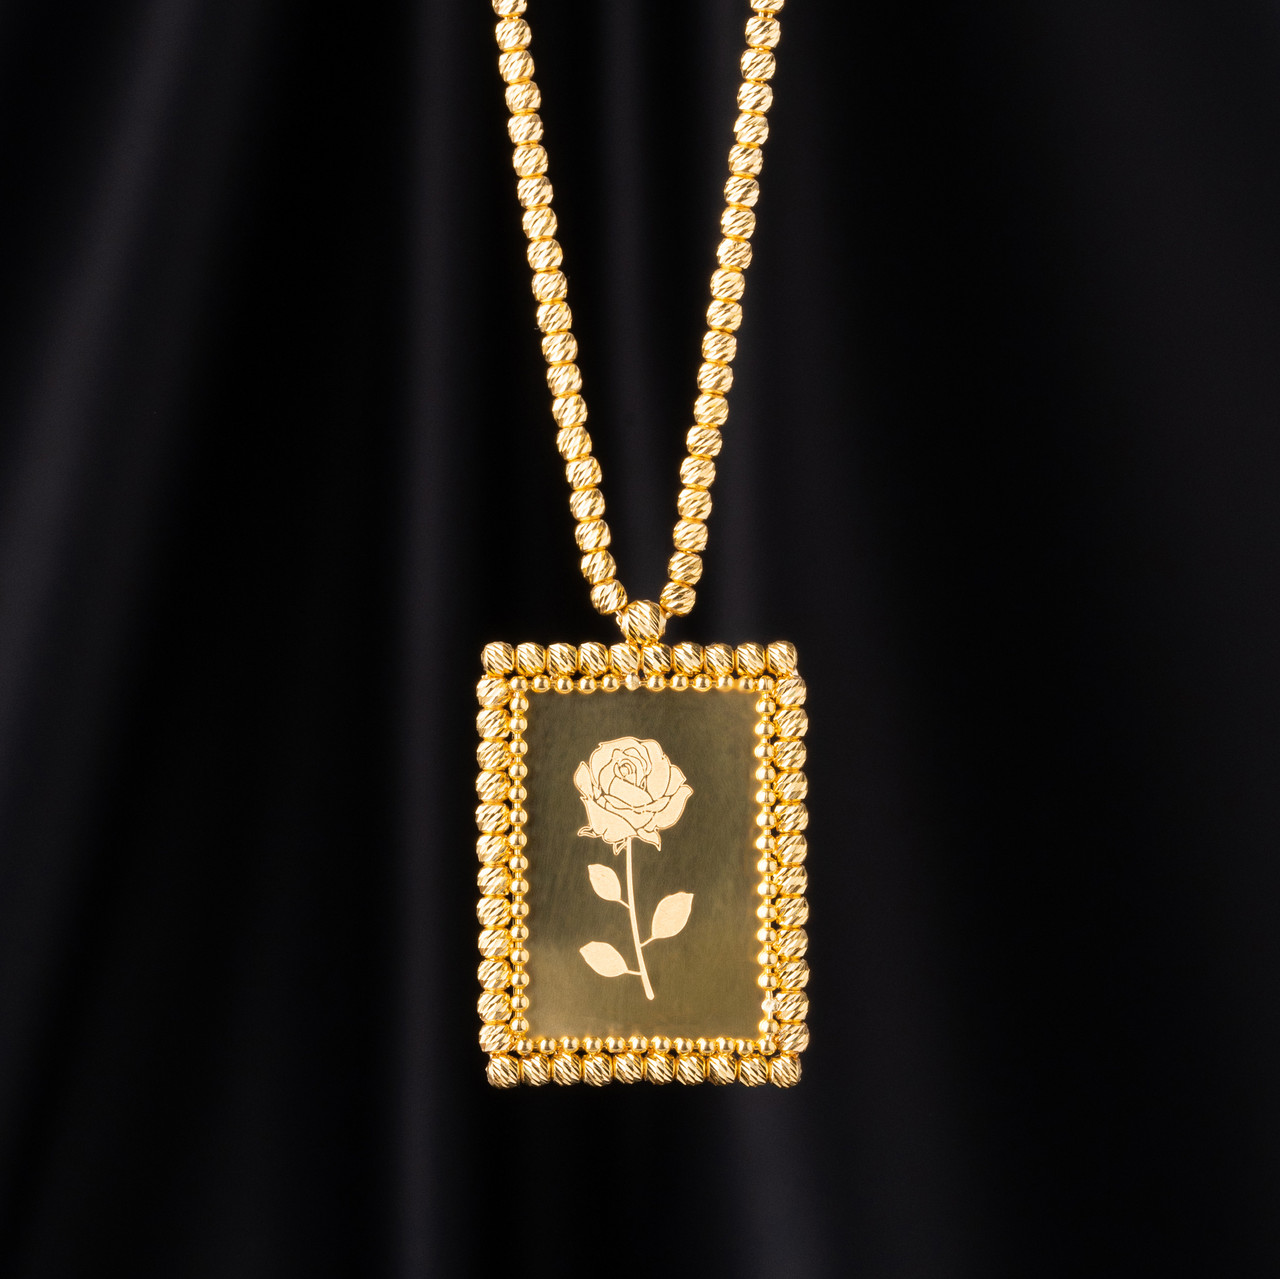 YELLOW GOLD NECKLACE, 21K, Weight:20.6g, YGNECKLACE047 - Baladna Jewelry